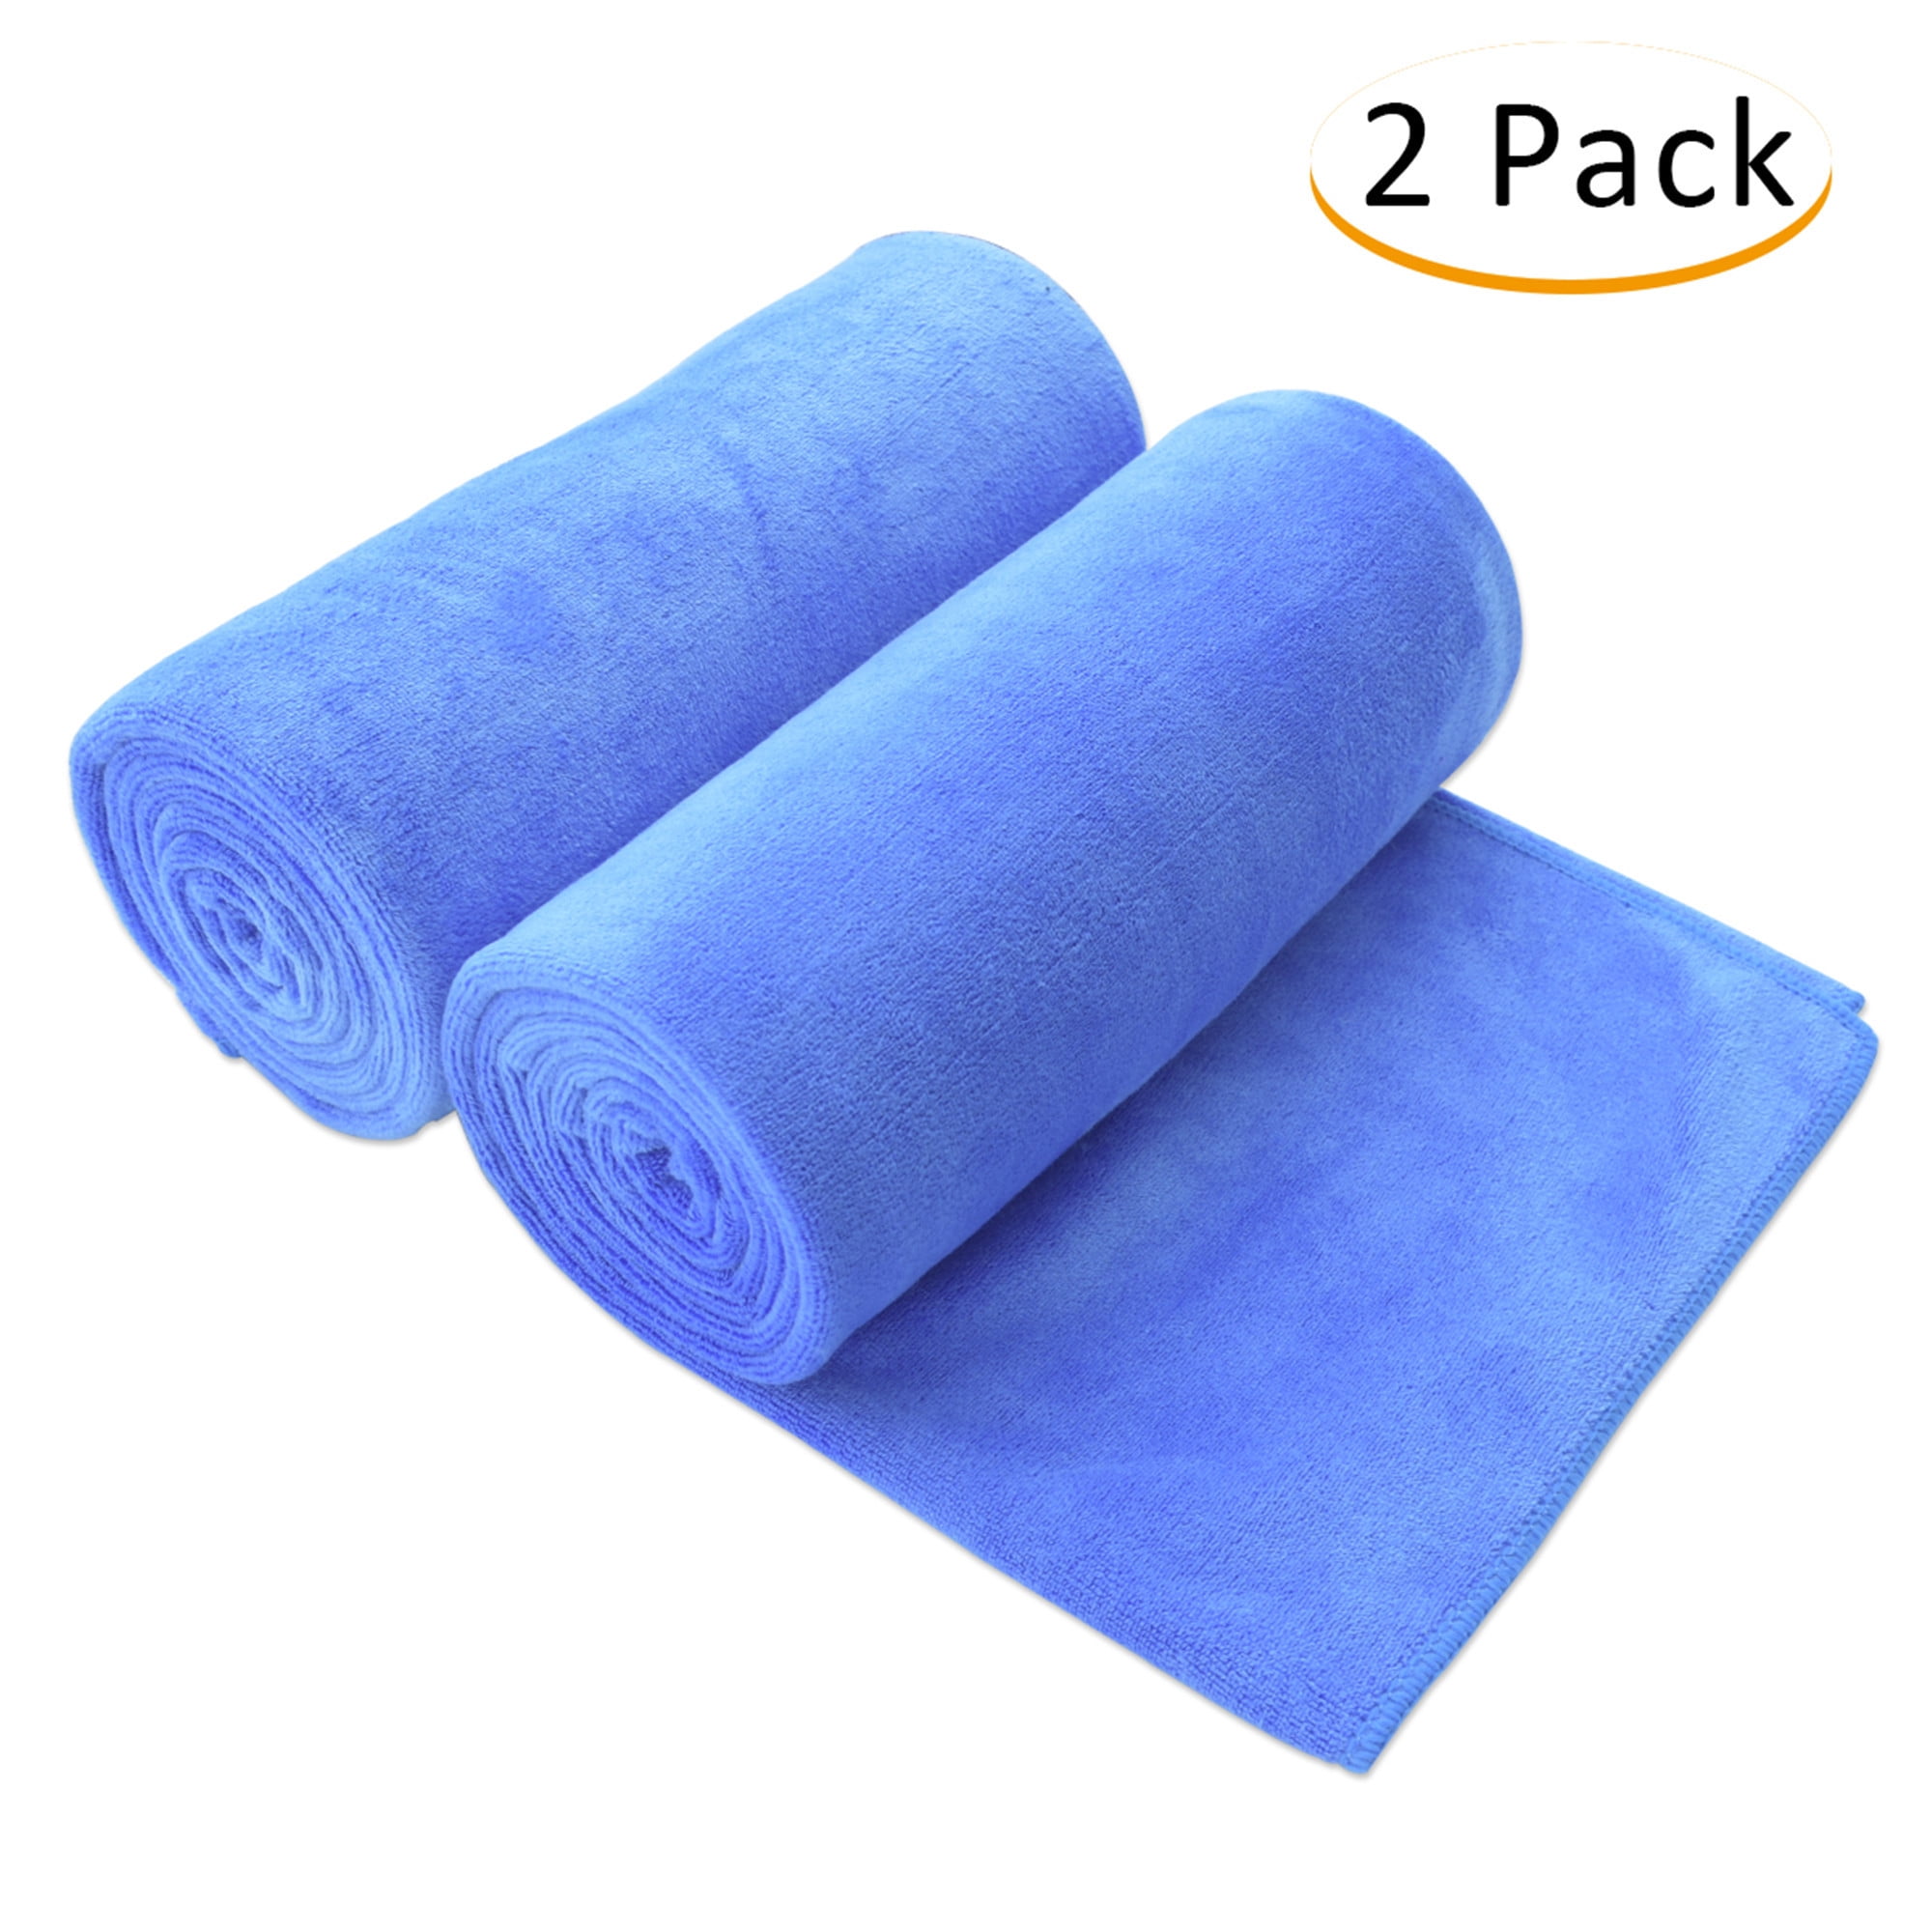 Soft Microfiber Absorbent Water Quick-Drying Towels Travel Beach Bath Body Towel